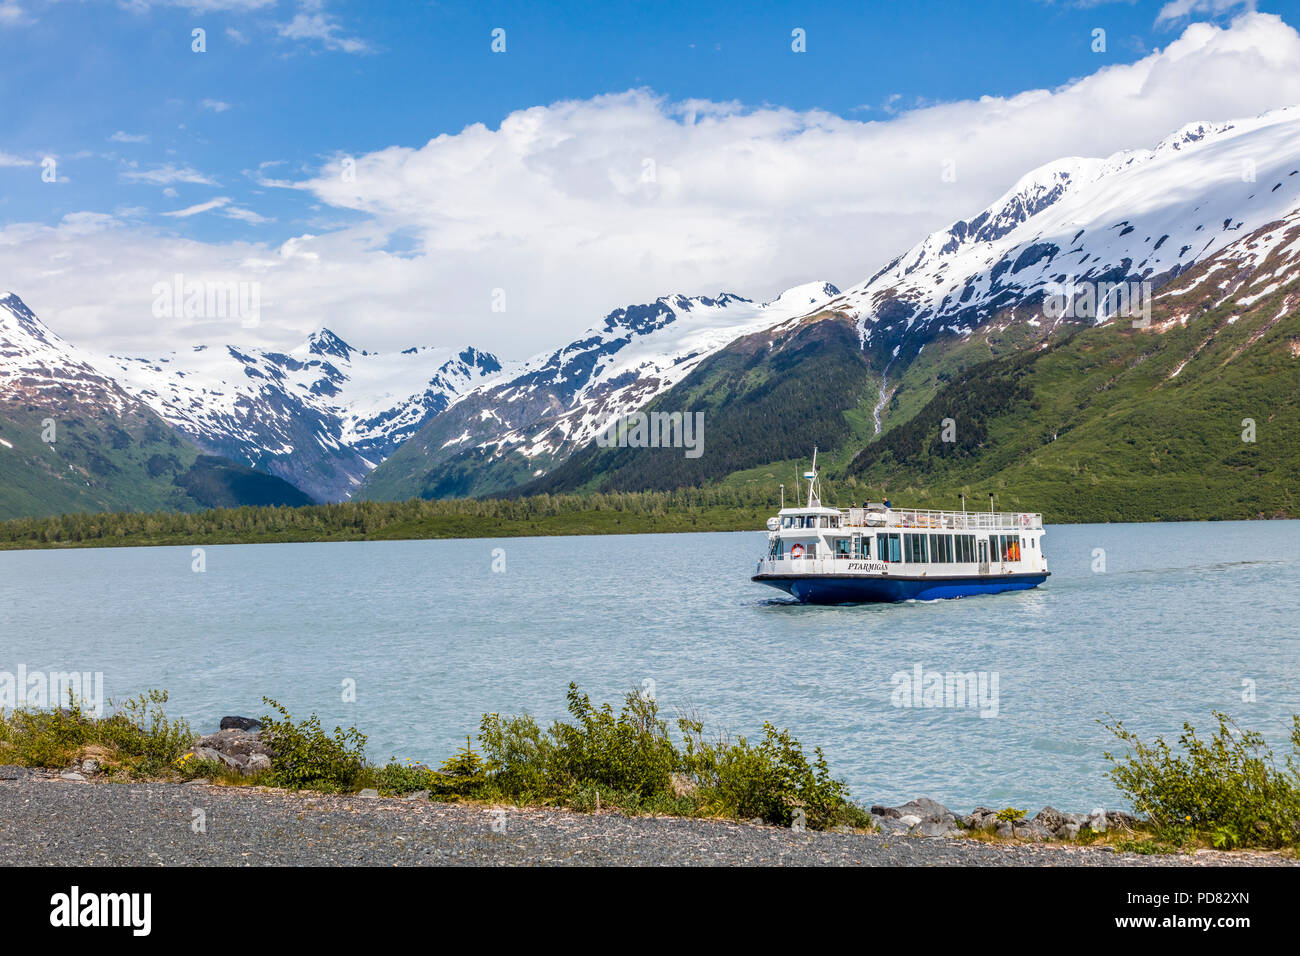 Glacier tour boat mv Ptarmigan on Portage Lake which  is a glacial lake in the Chugach National Forest on the Kenai Peninsula of Alaska Stock Photo